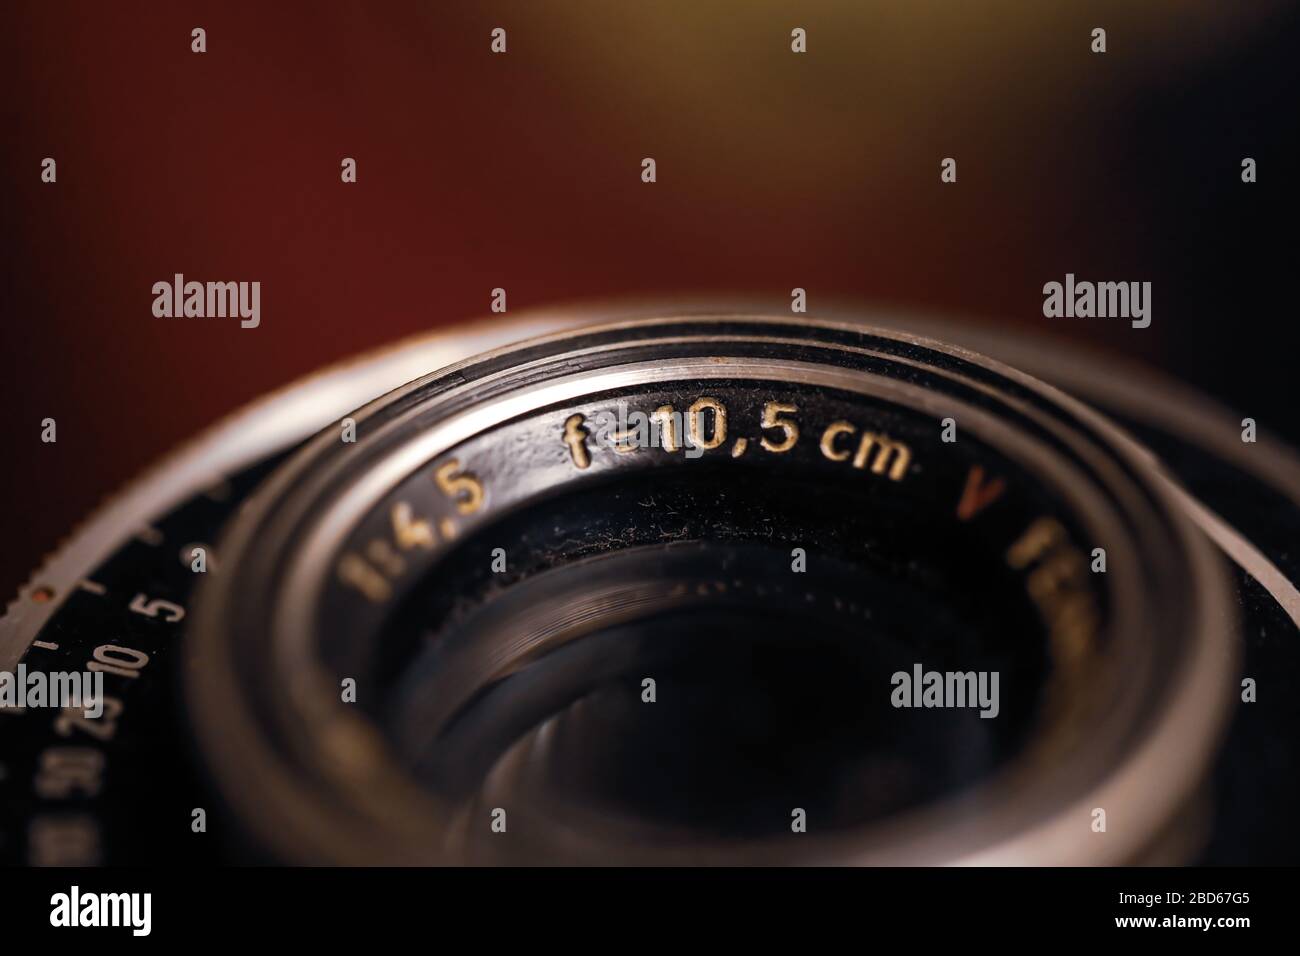 Shallow depth of field (selective focus) details with an old and